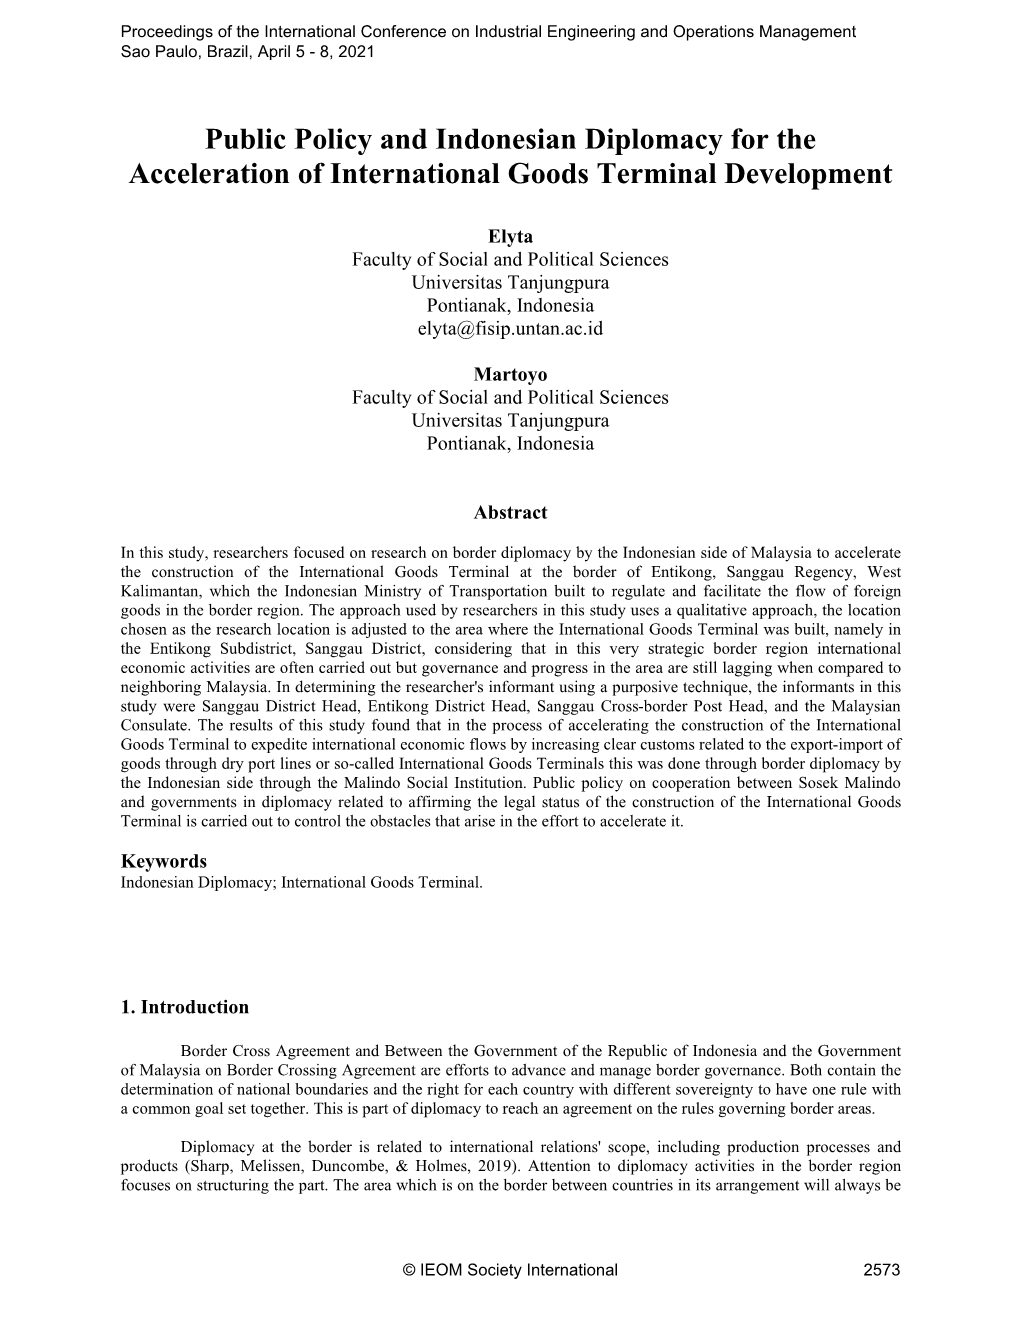 Public Policy and Indonesian Diplomacy for the Acceleration of International Goods Terminal Development